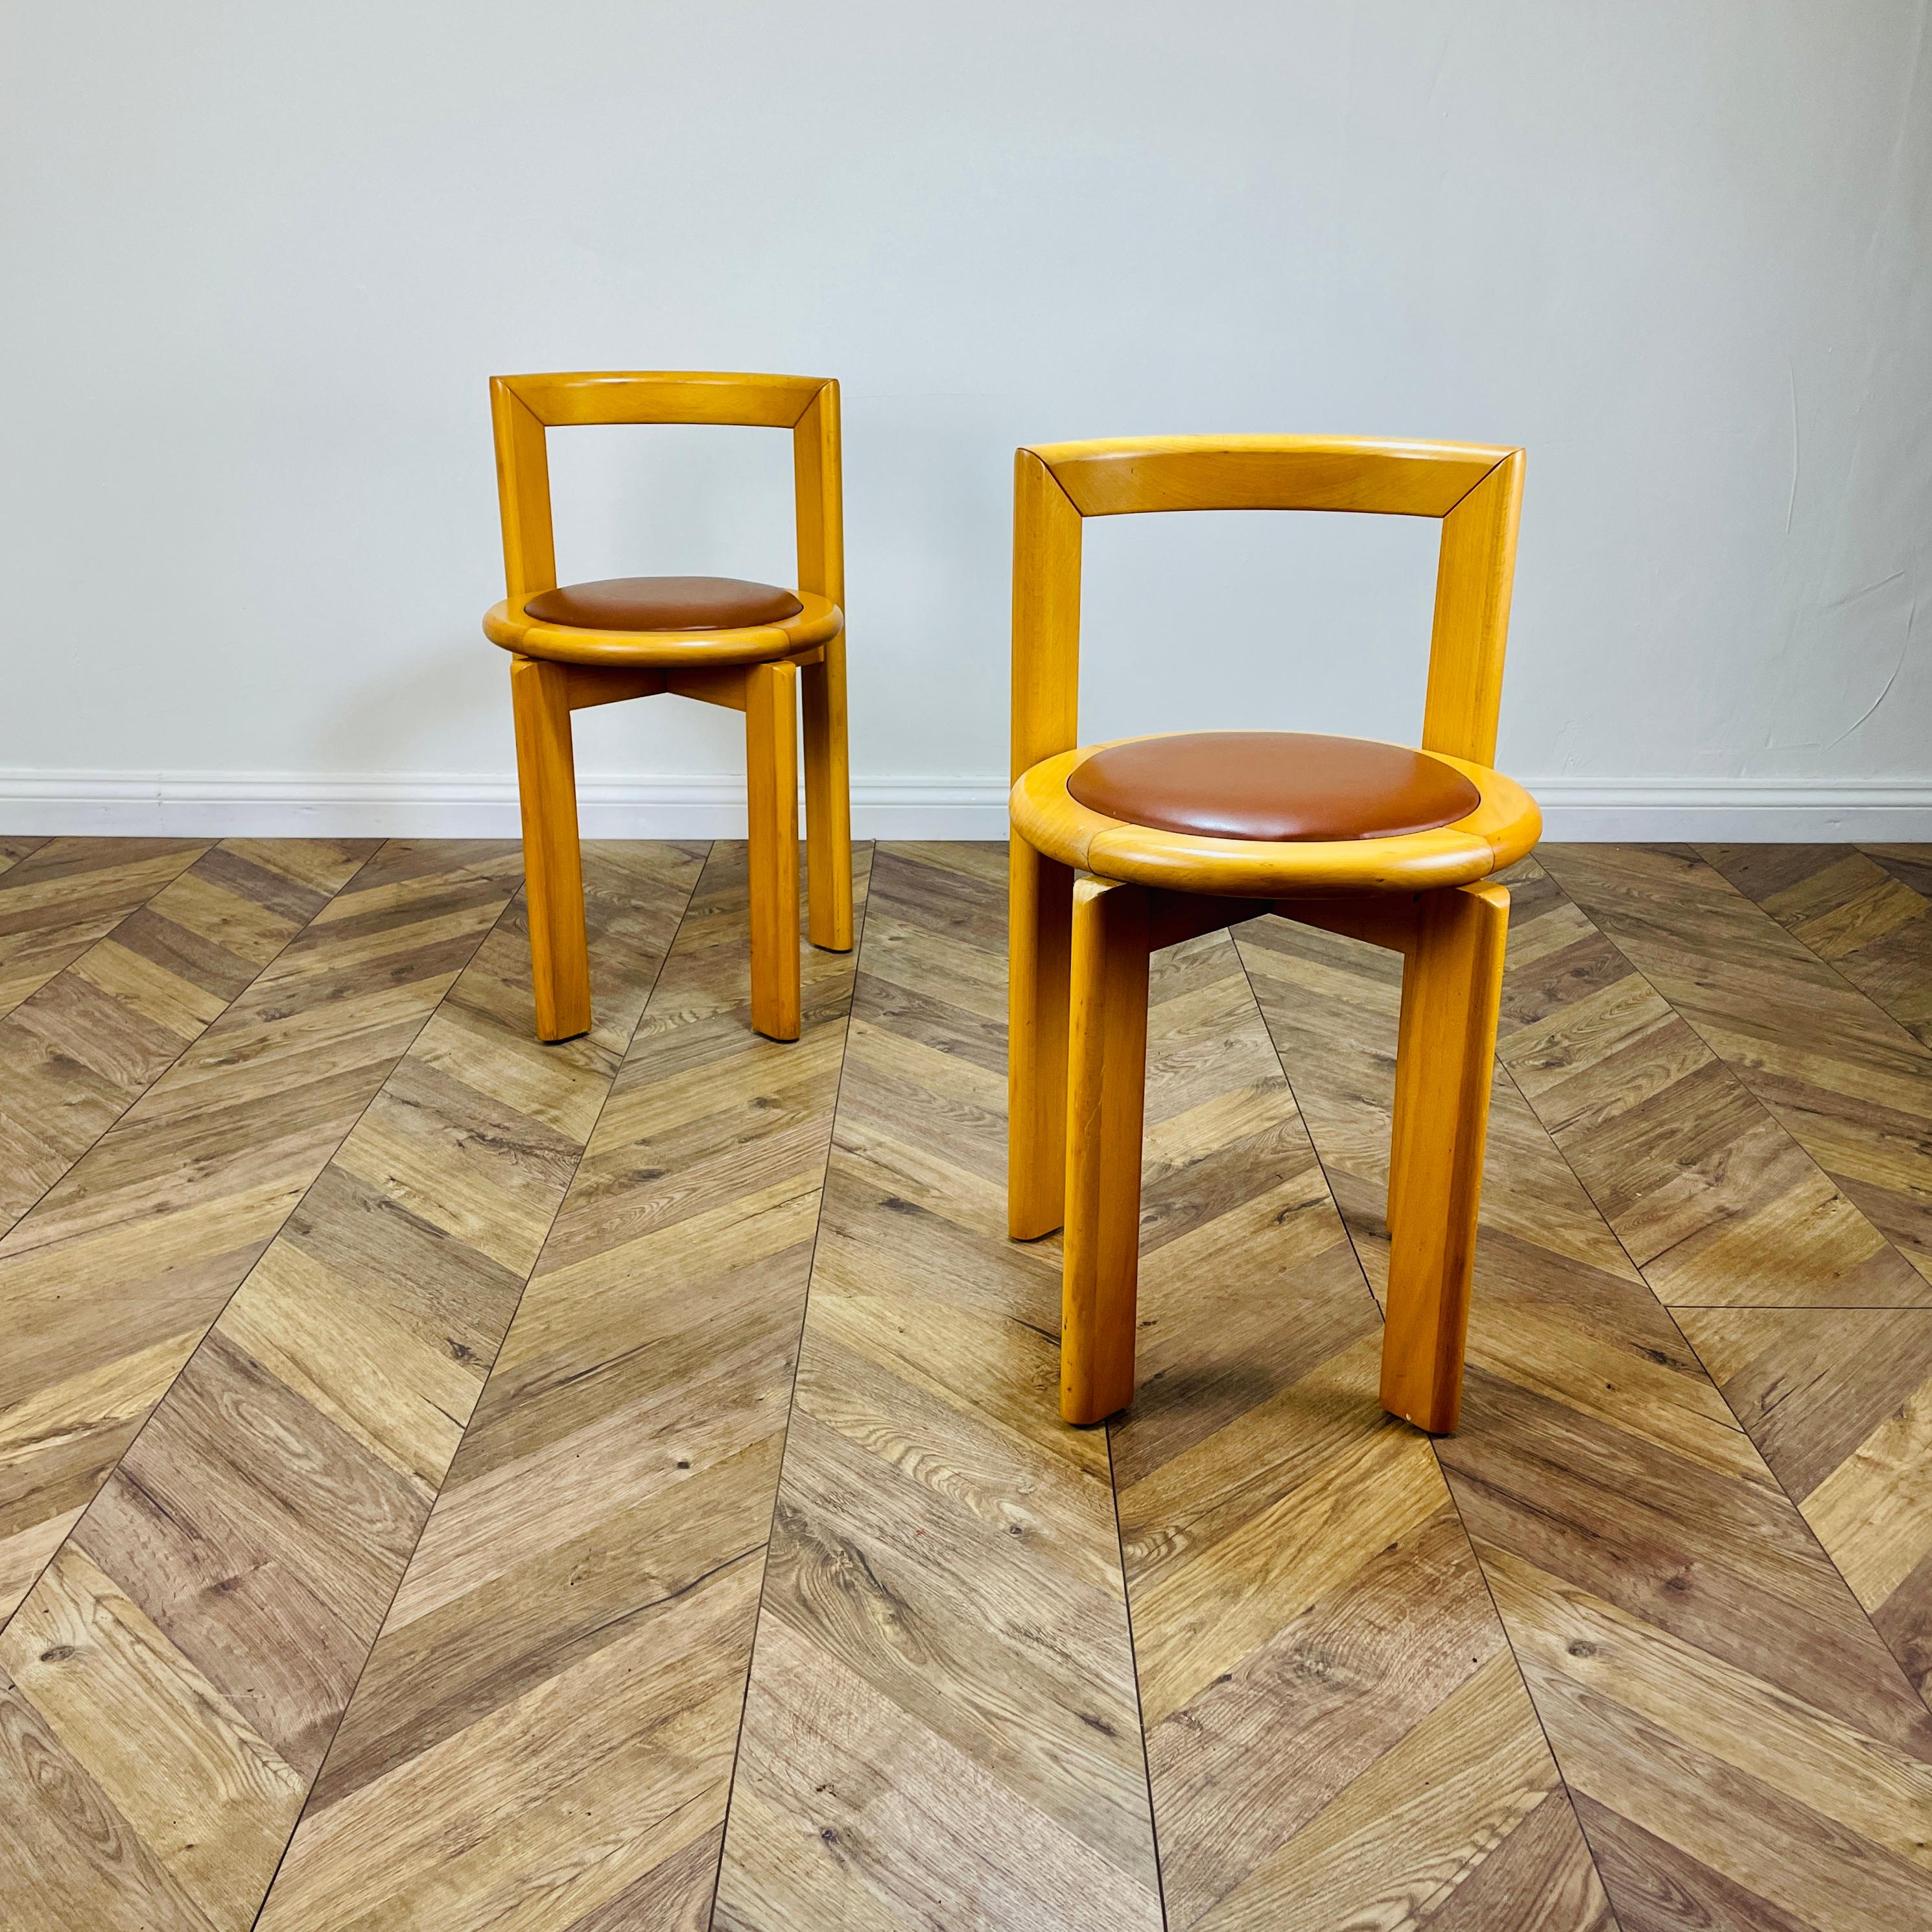 Beech Modernist Chairs inspired by Bruno Rey, Made by Glimåkra of Sweden, Set of 2